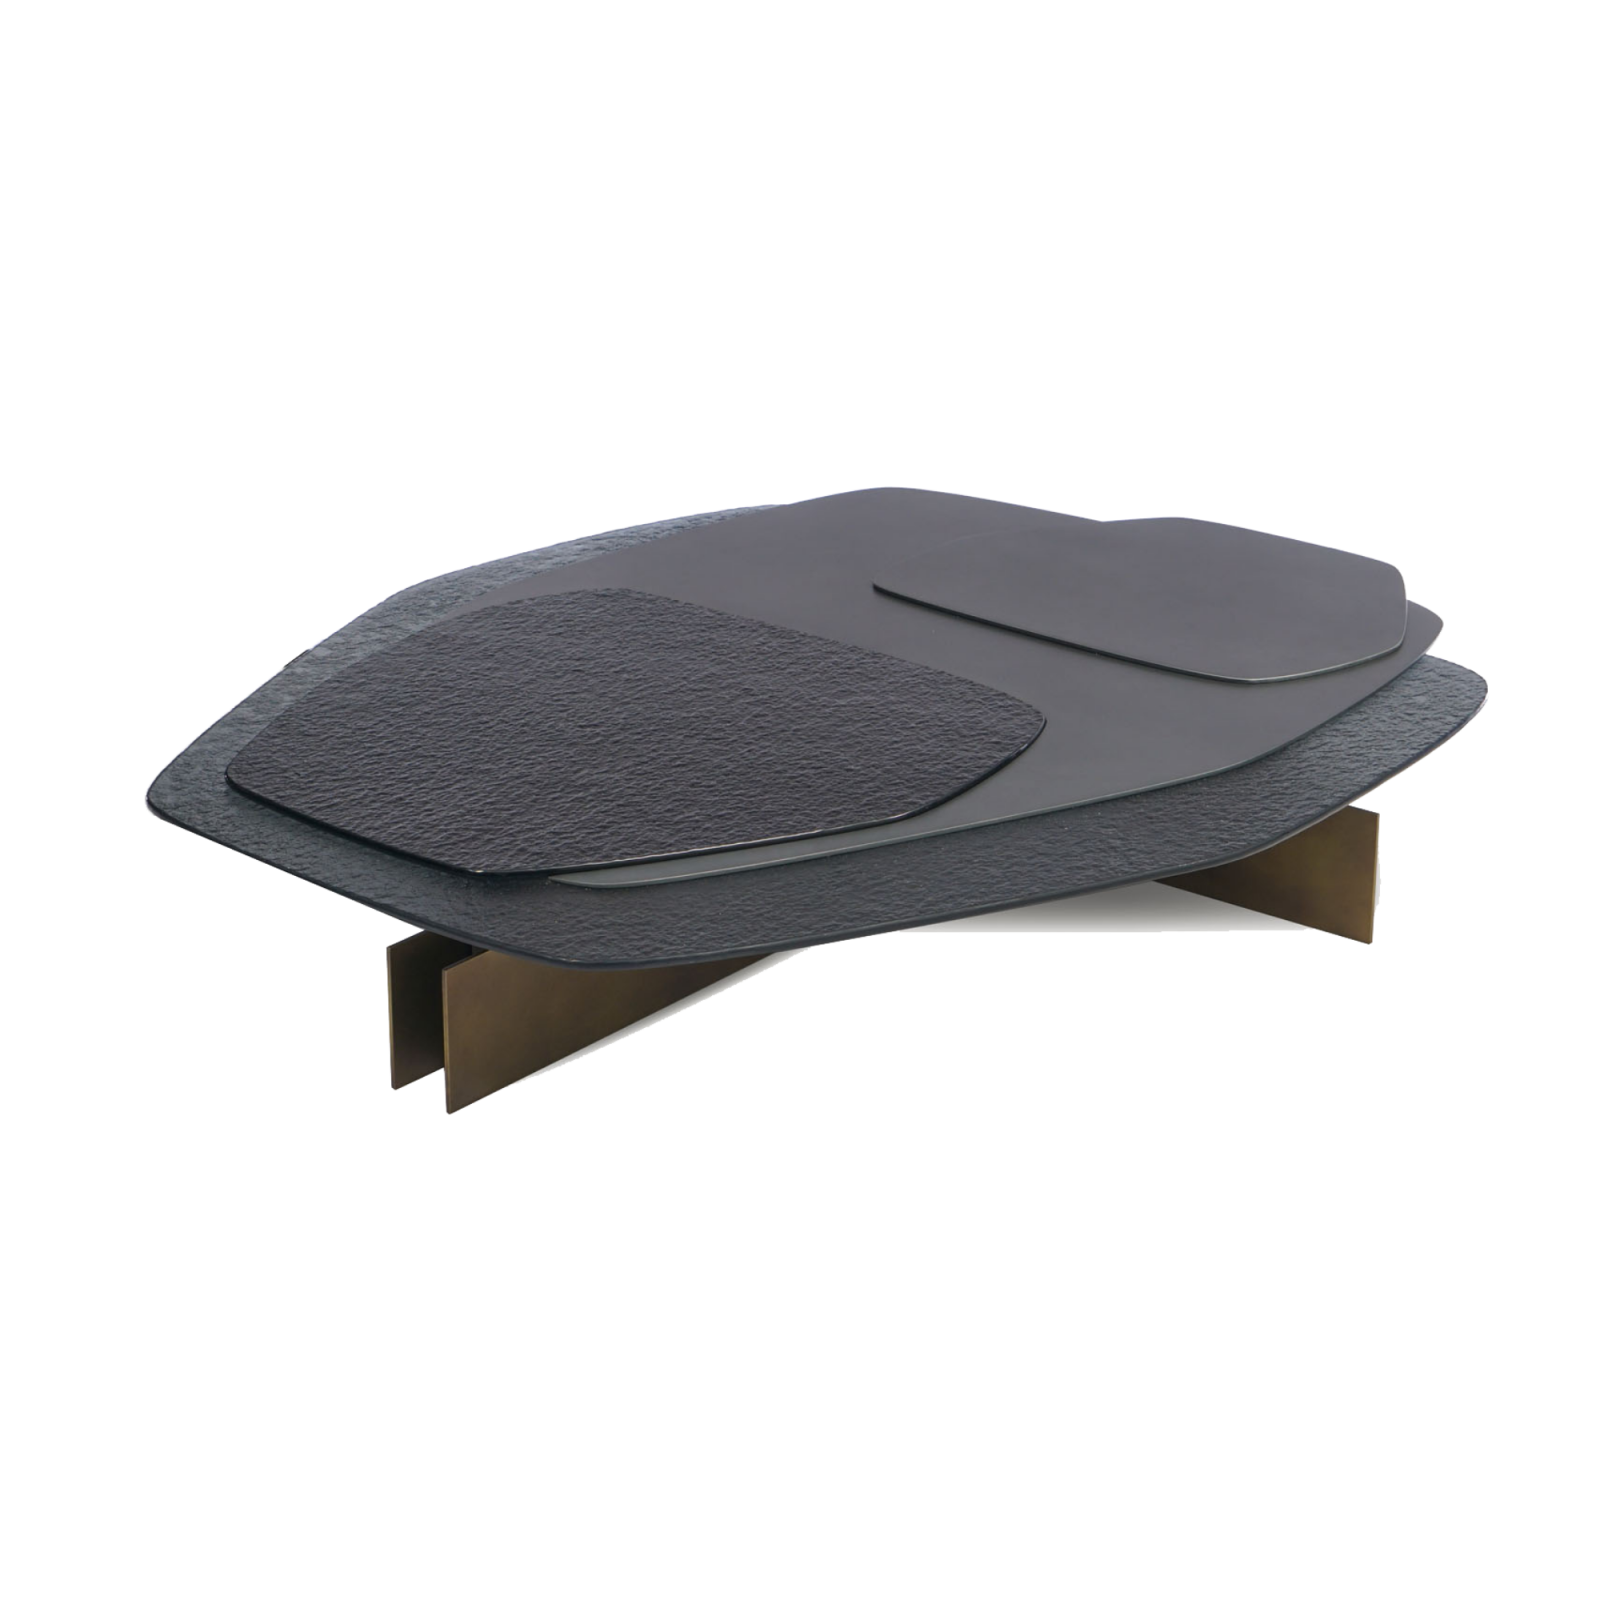 Stone Coffee Table is made from perfection with its bold combination of metal and fusion glass standing on a white background.